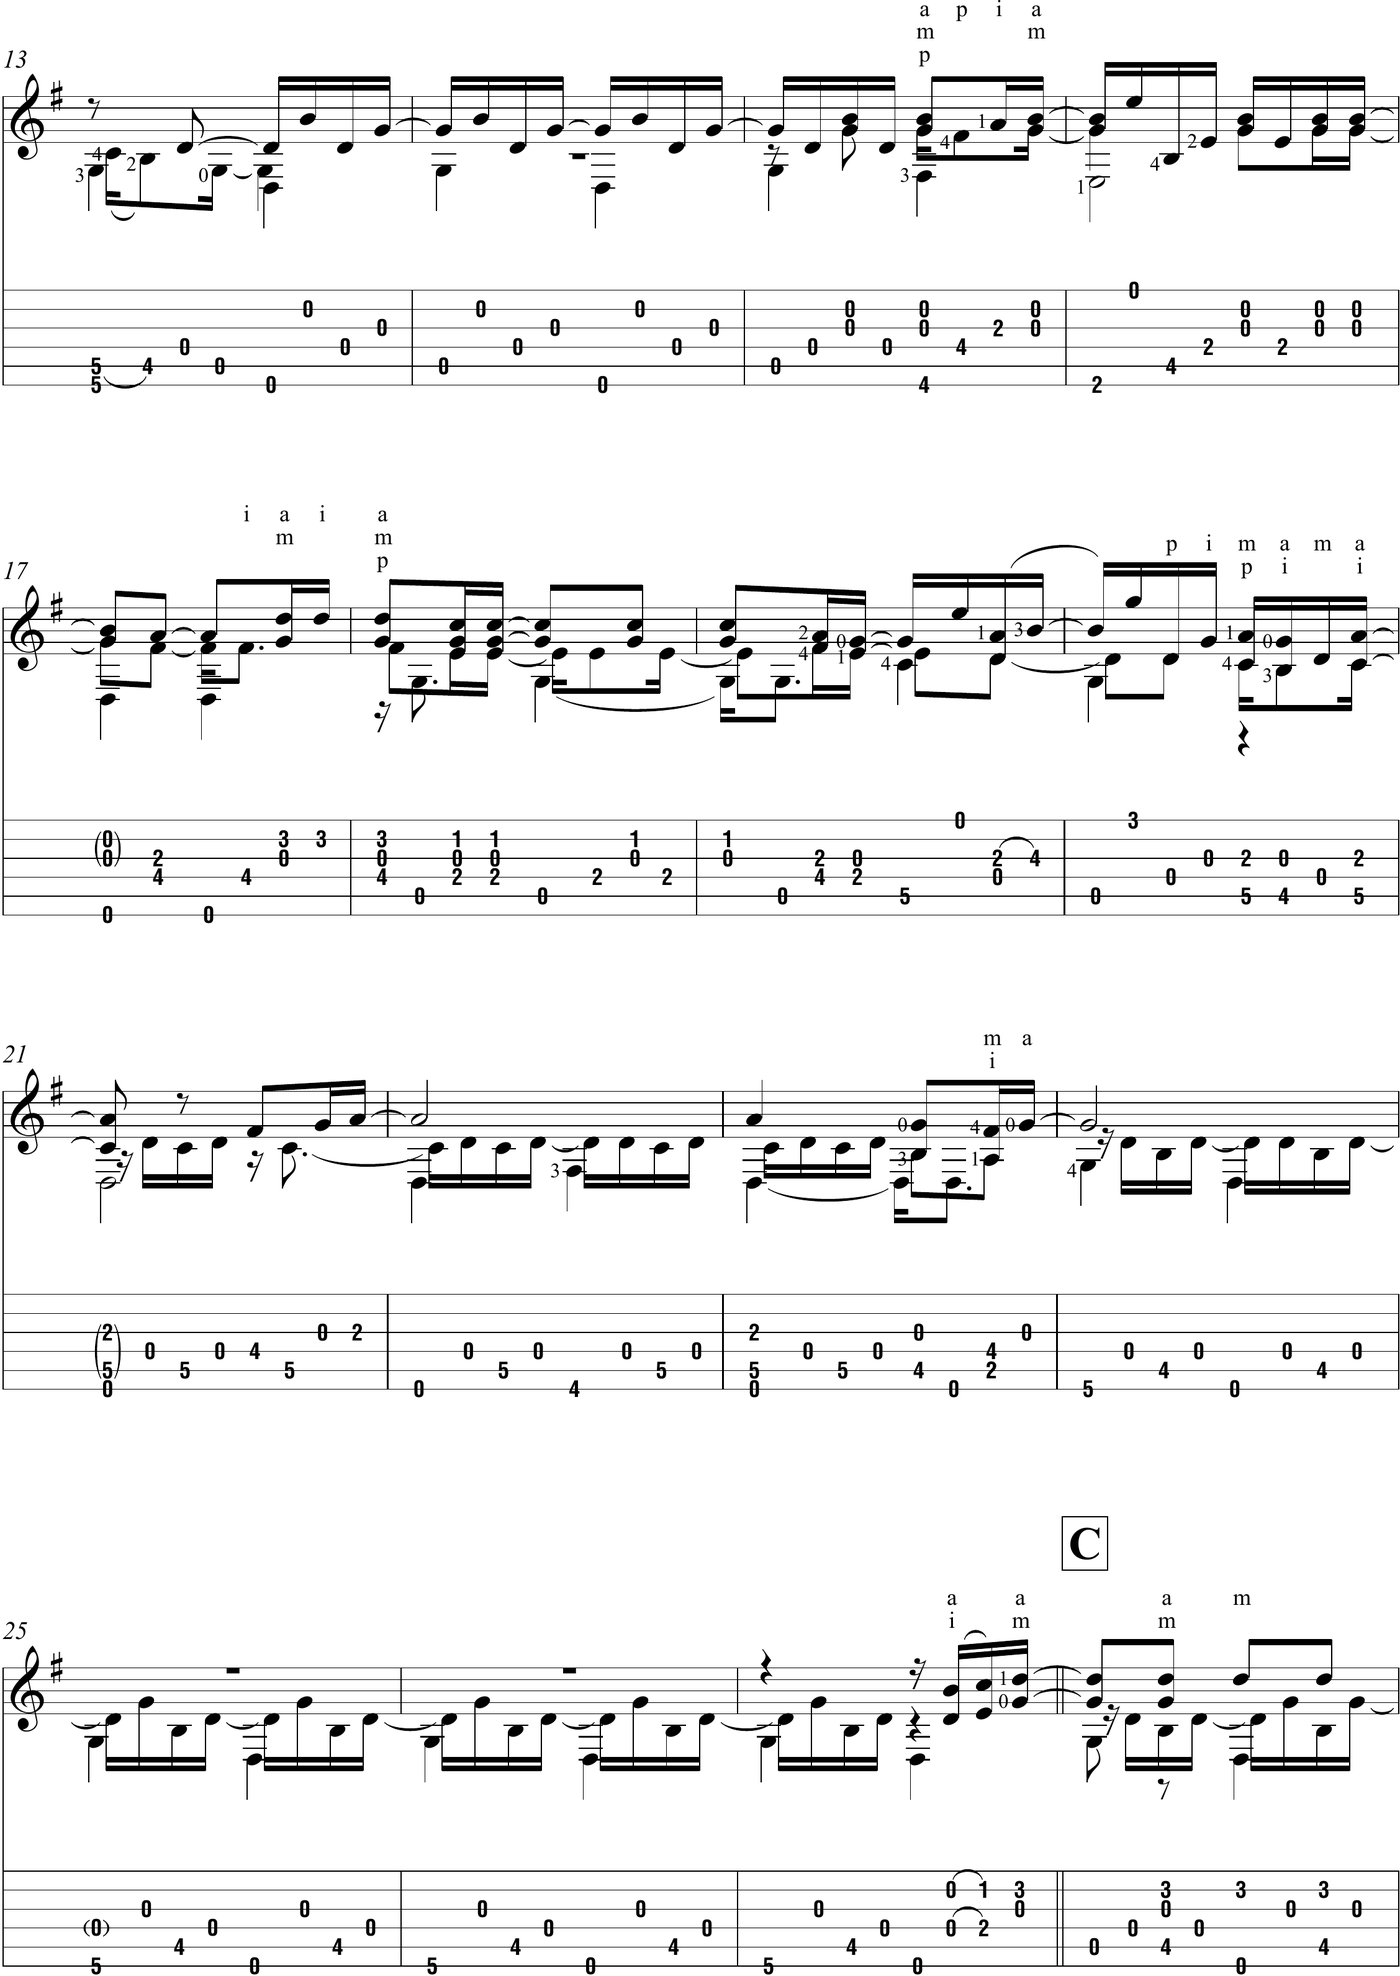 Classical Guitar Music for the Solo Performer 20 Popular Songs Superbly Arranged in Standard Notation and Tab - photo 7